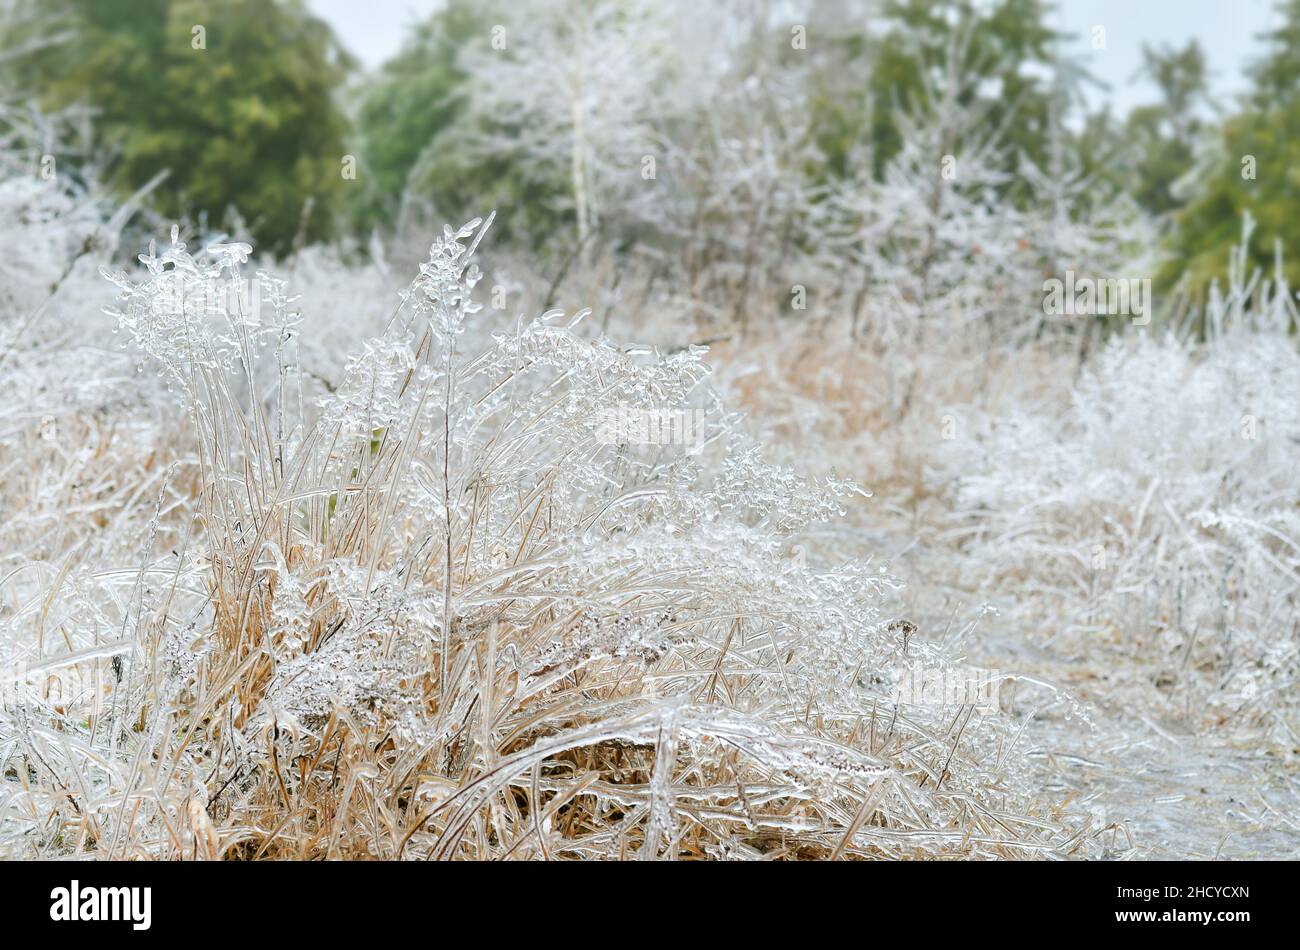 Aftermath of freezing rain. Icy rain covered all a plants at the beginning of winter. Effect of atmospheric icing. Stock Photo